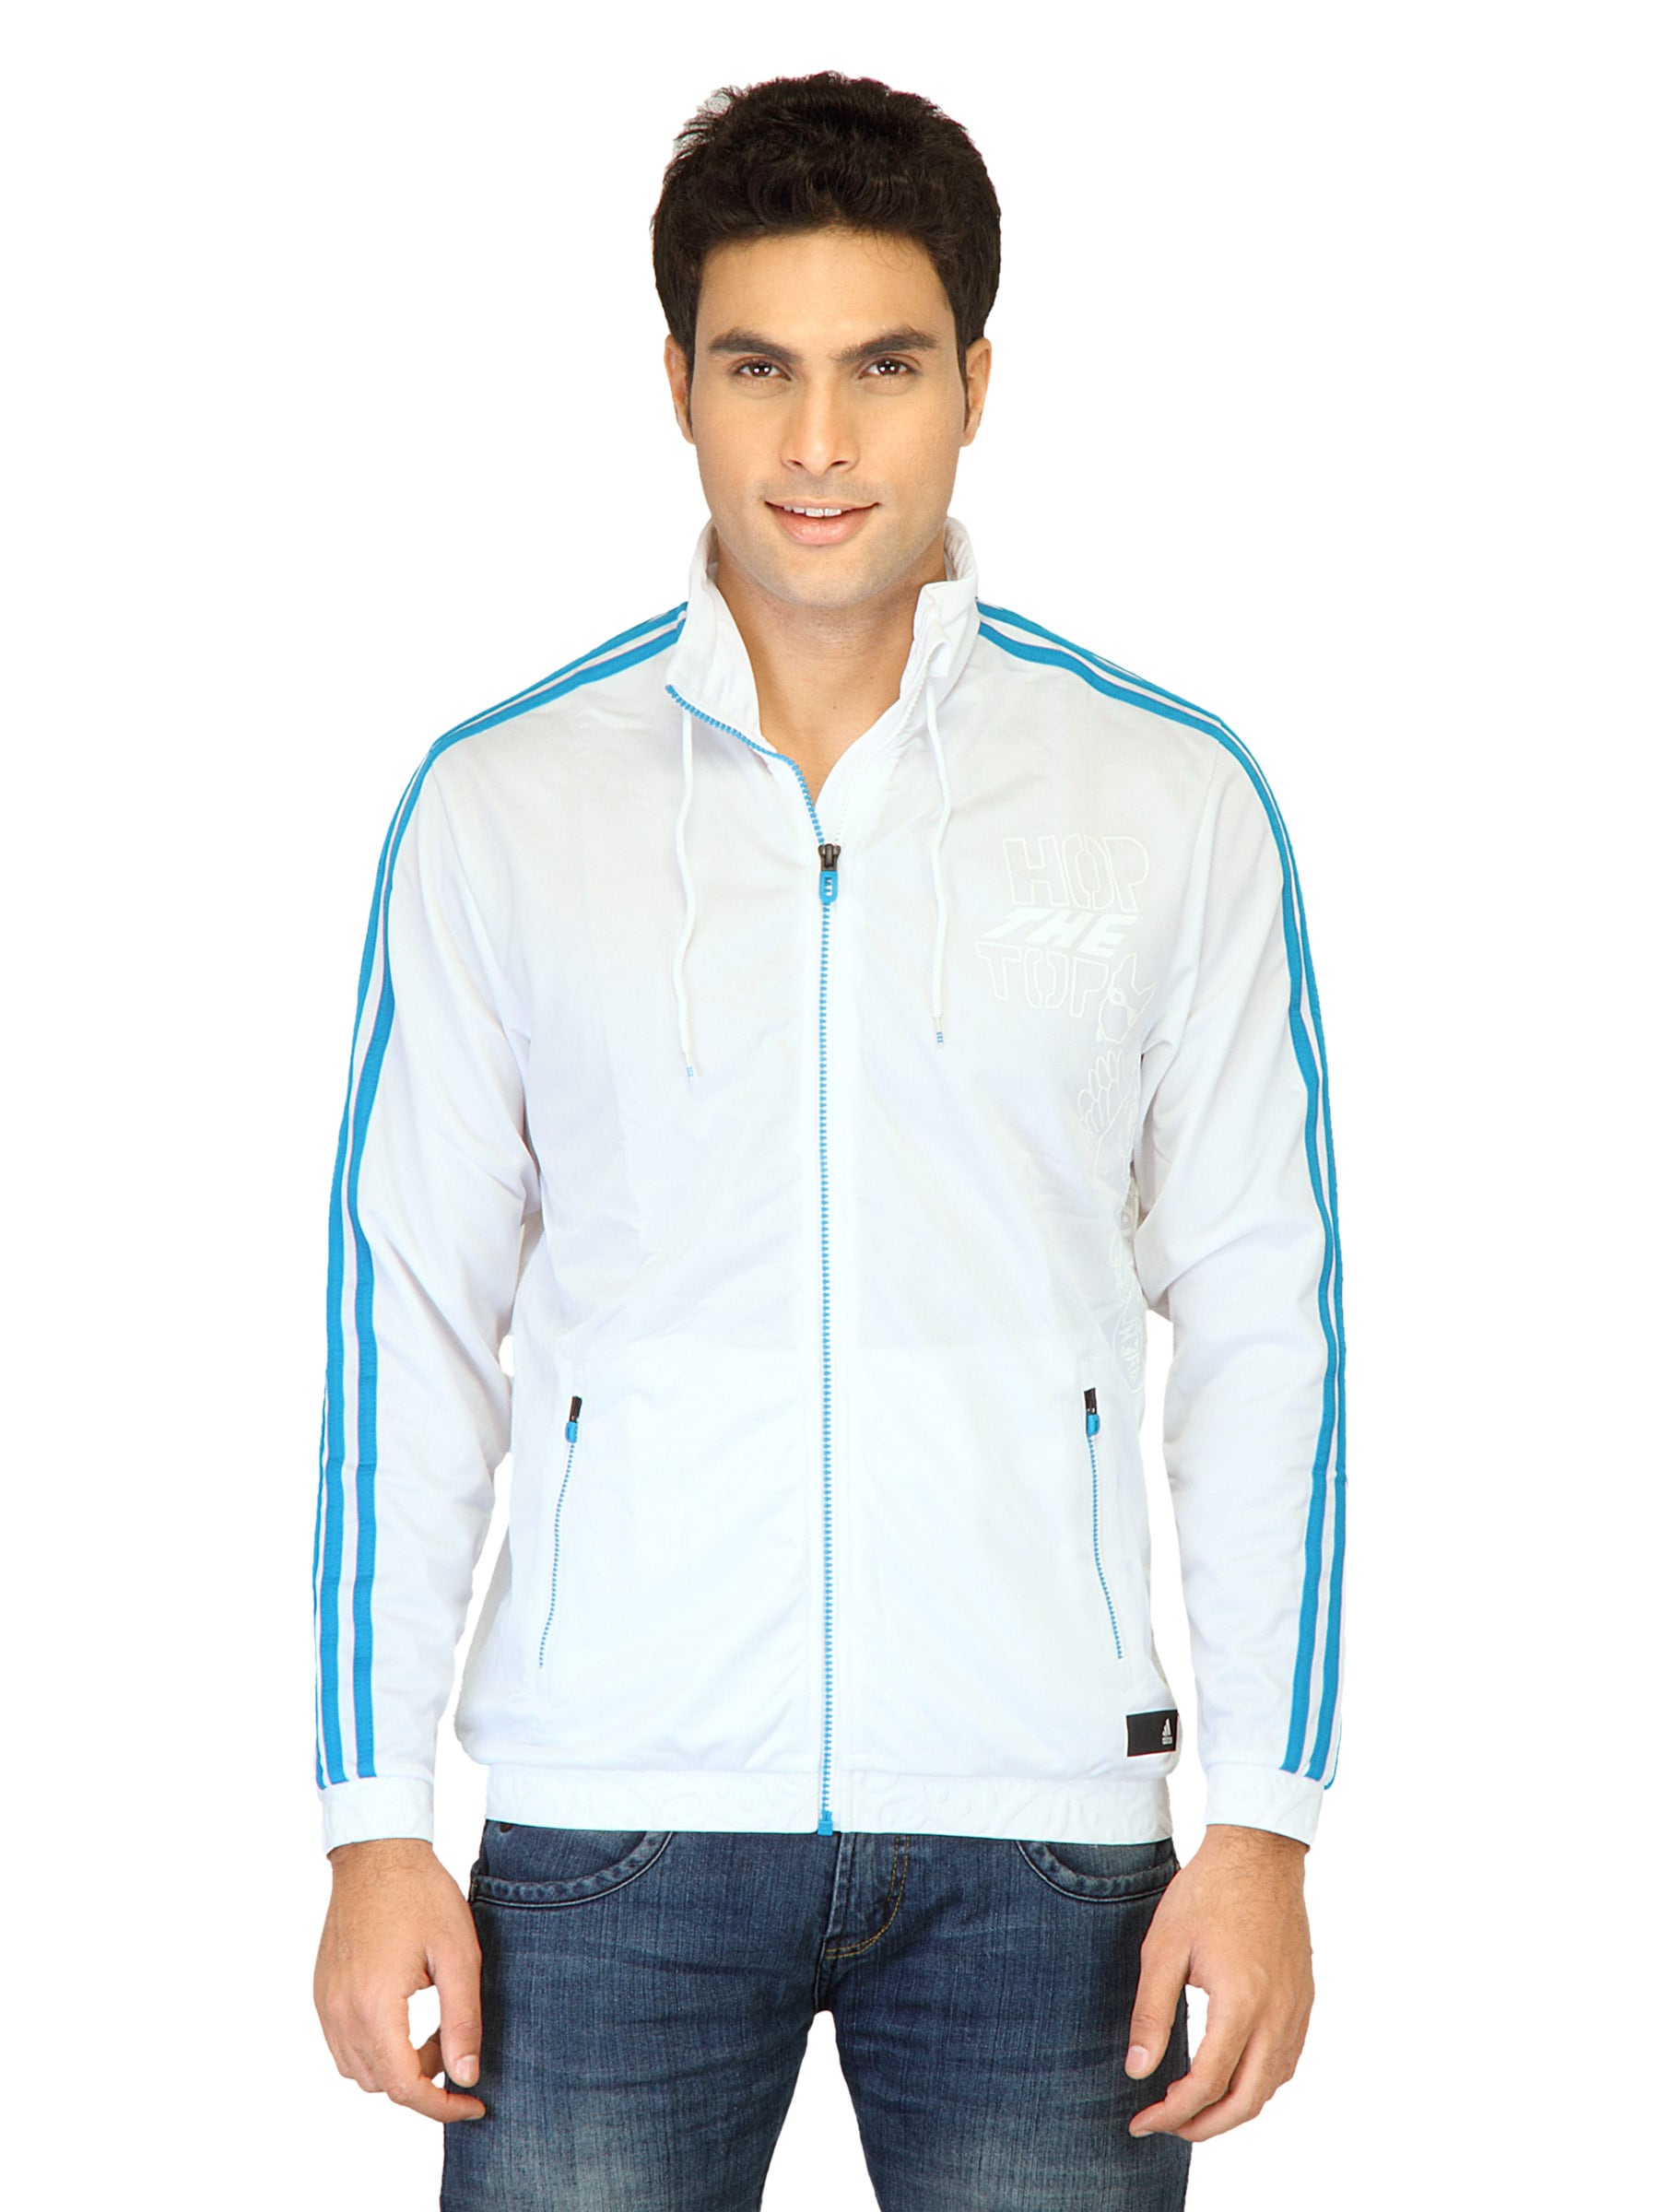 ADIDAS Men Bnce T-Top White Jackets